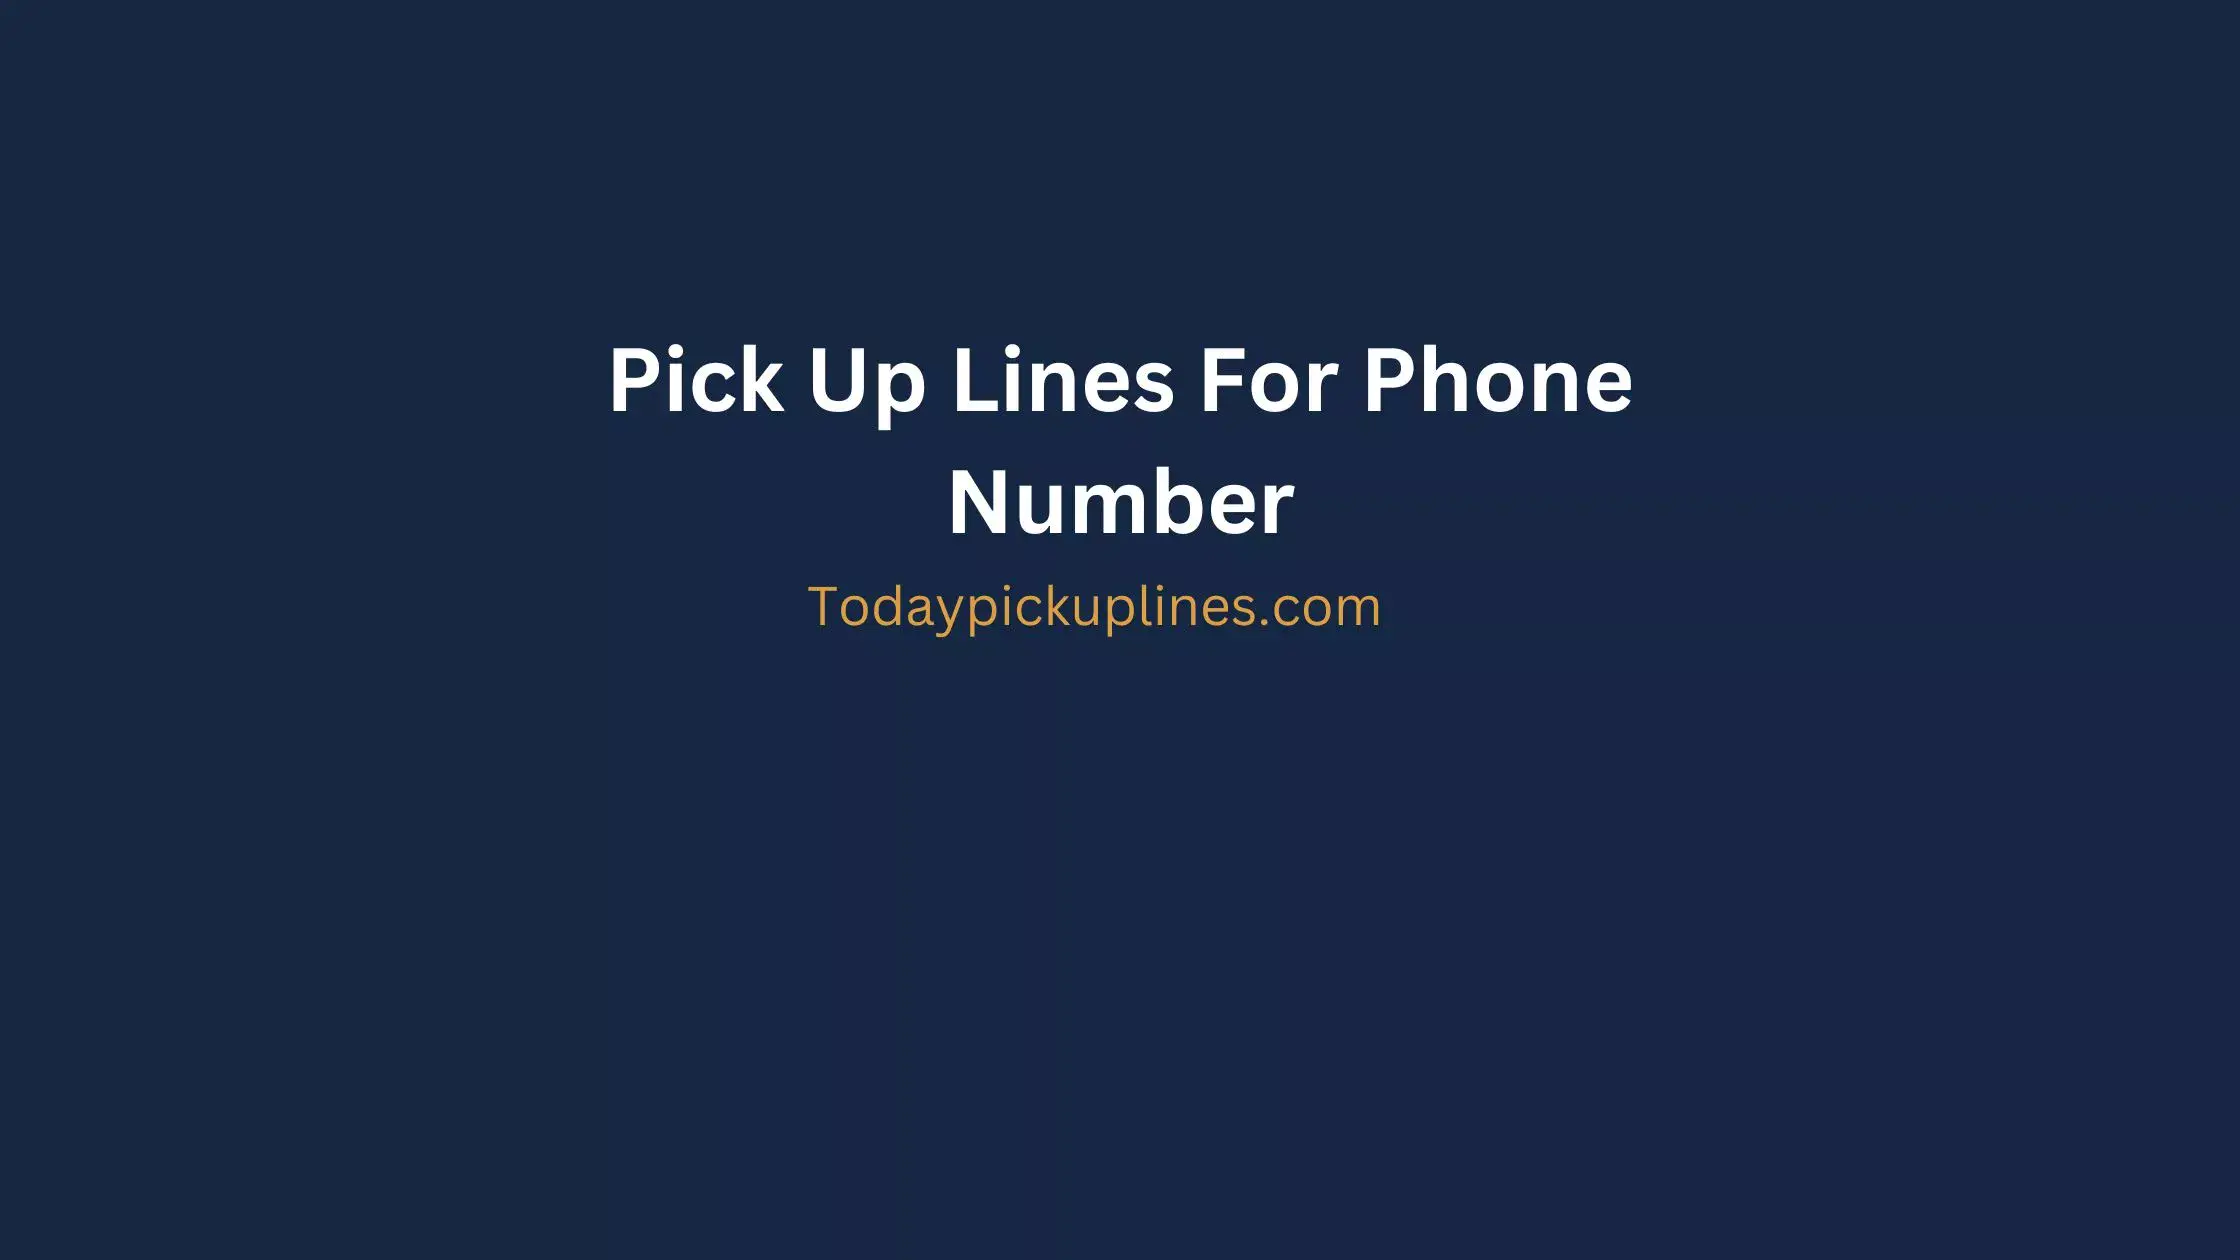 Pick Up Lines For Phone Number